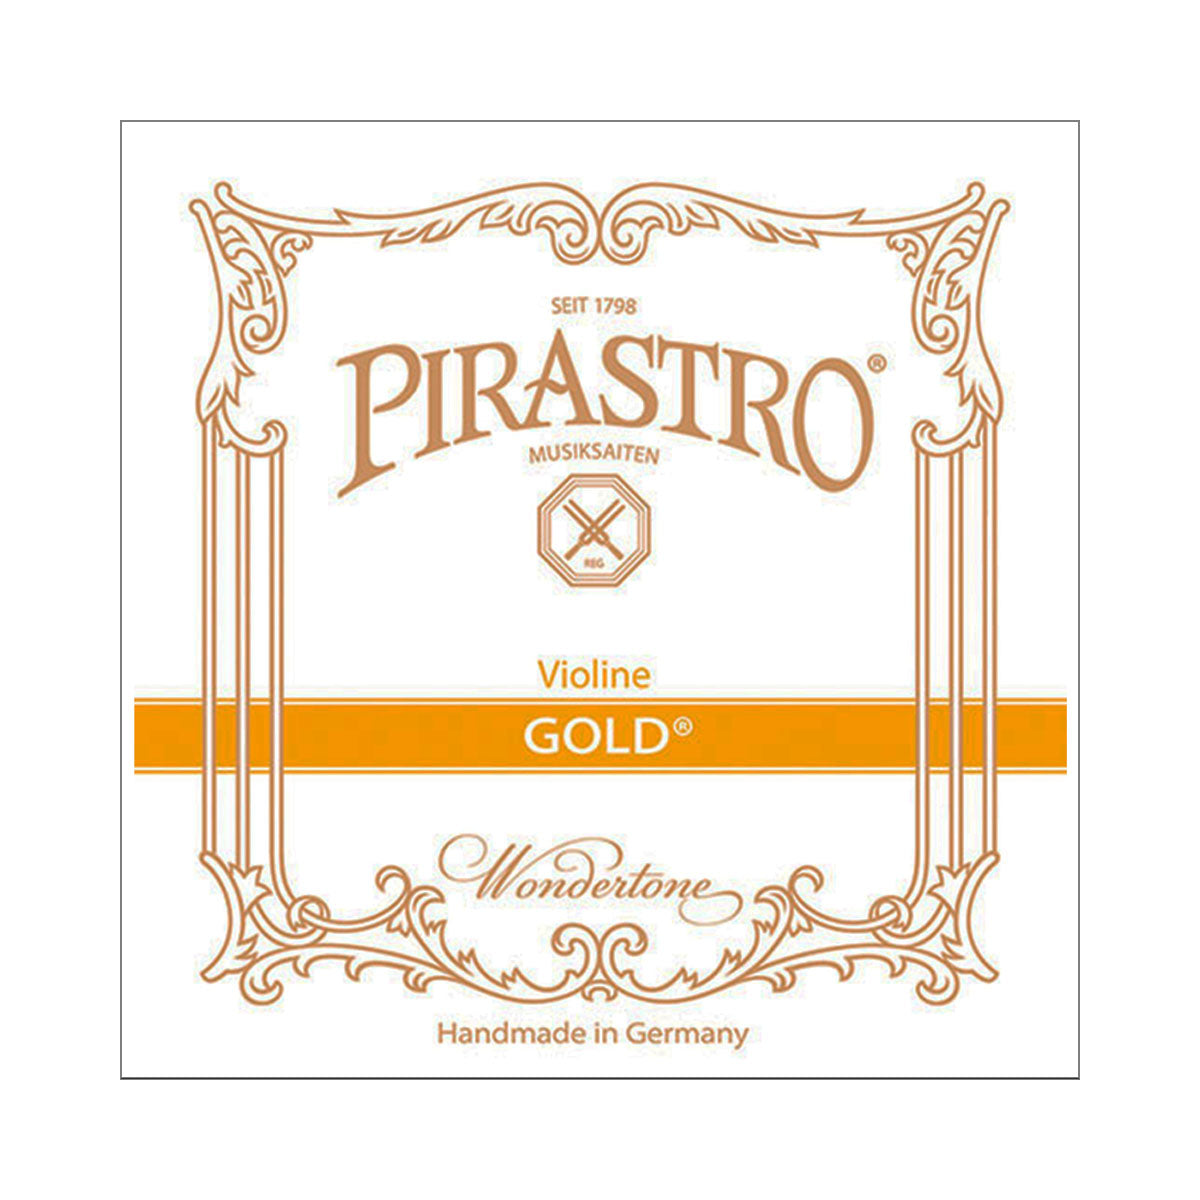 Gold Label Violin strings, Pirastro, Germany, gut core, full size, 4/4, , hand-picked and inspected by Violins and such, with TEO musical Instruments, London Ontario Canada